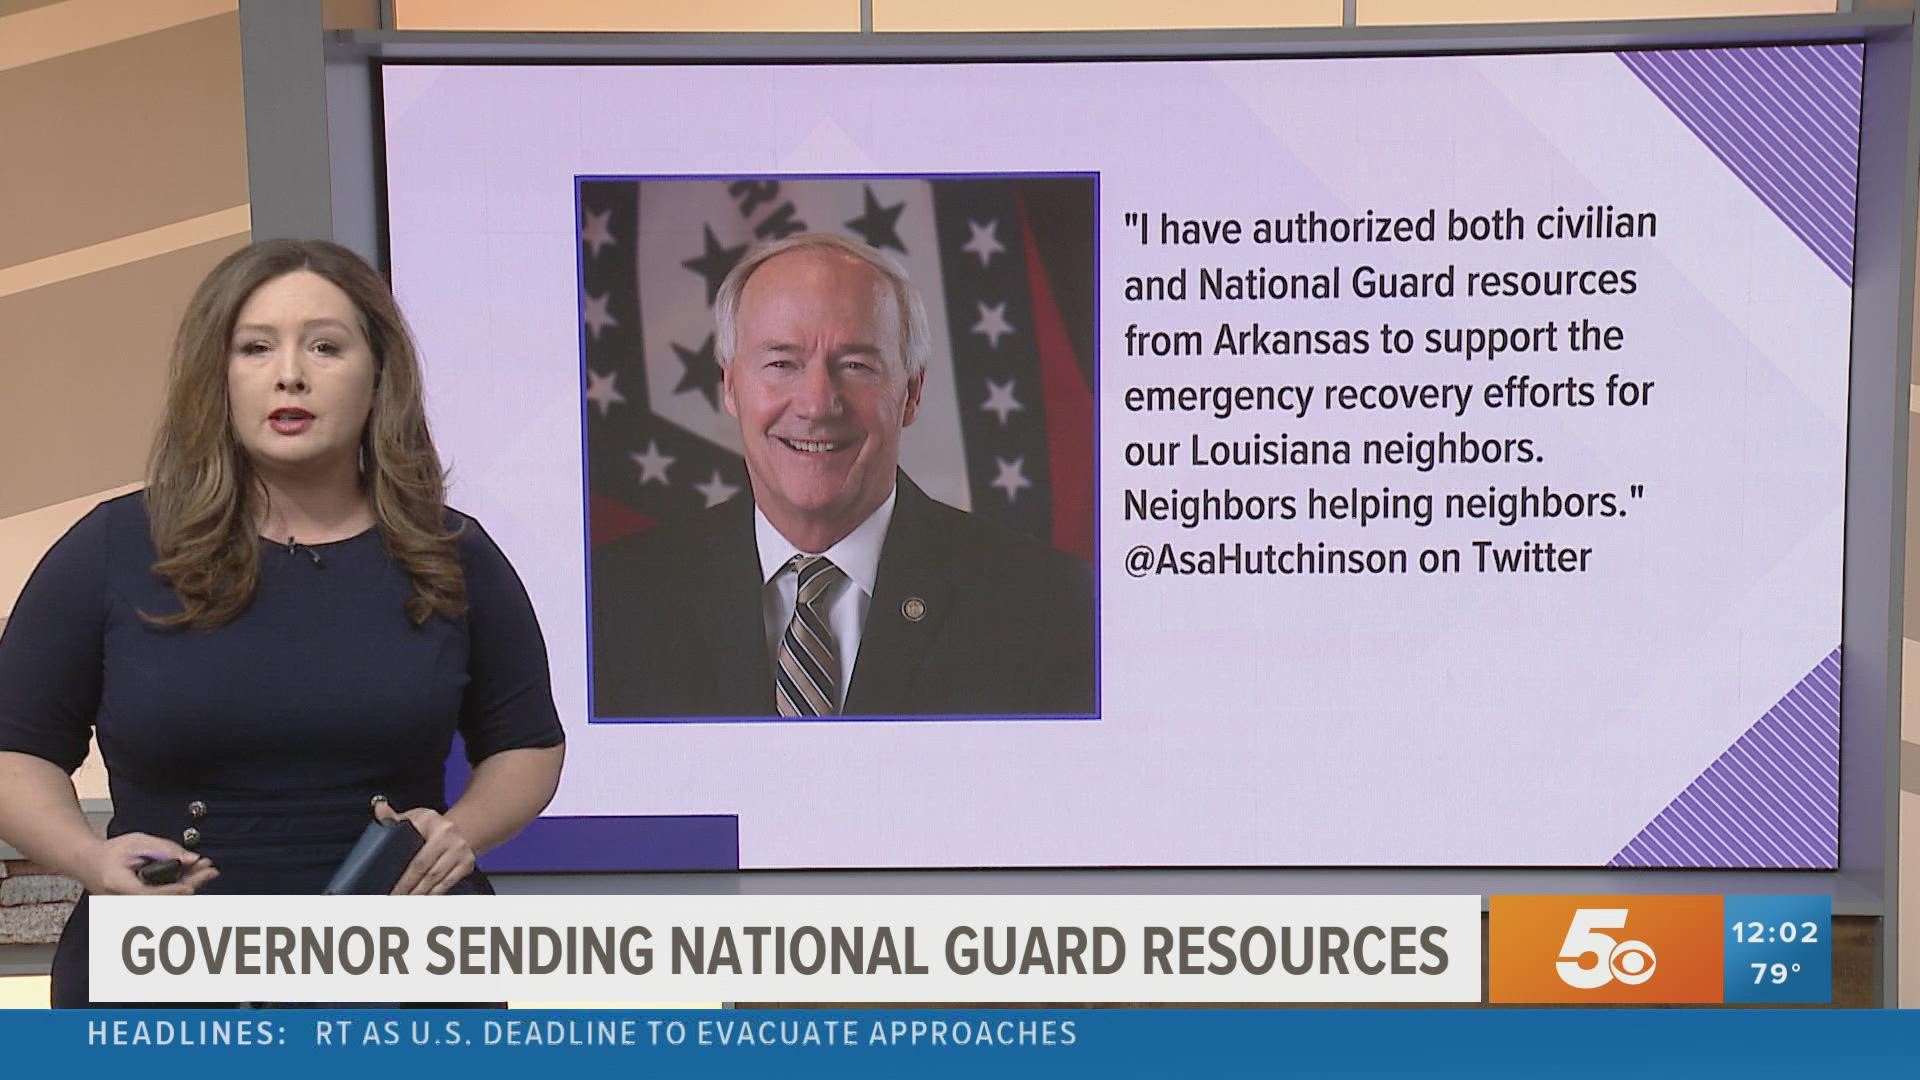 Governor Asa Hutchinson is authorizing Arkansas National Guard resources to be sent to Louisiana to aid in recovery efforts.